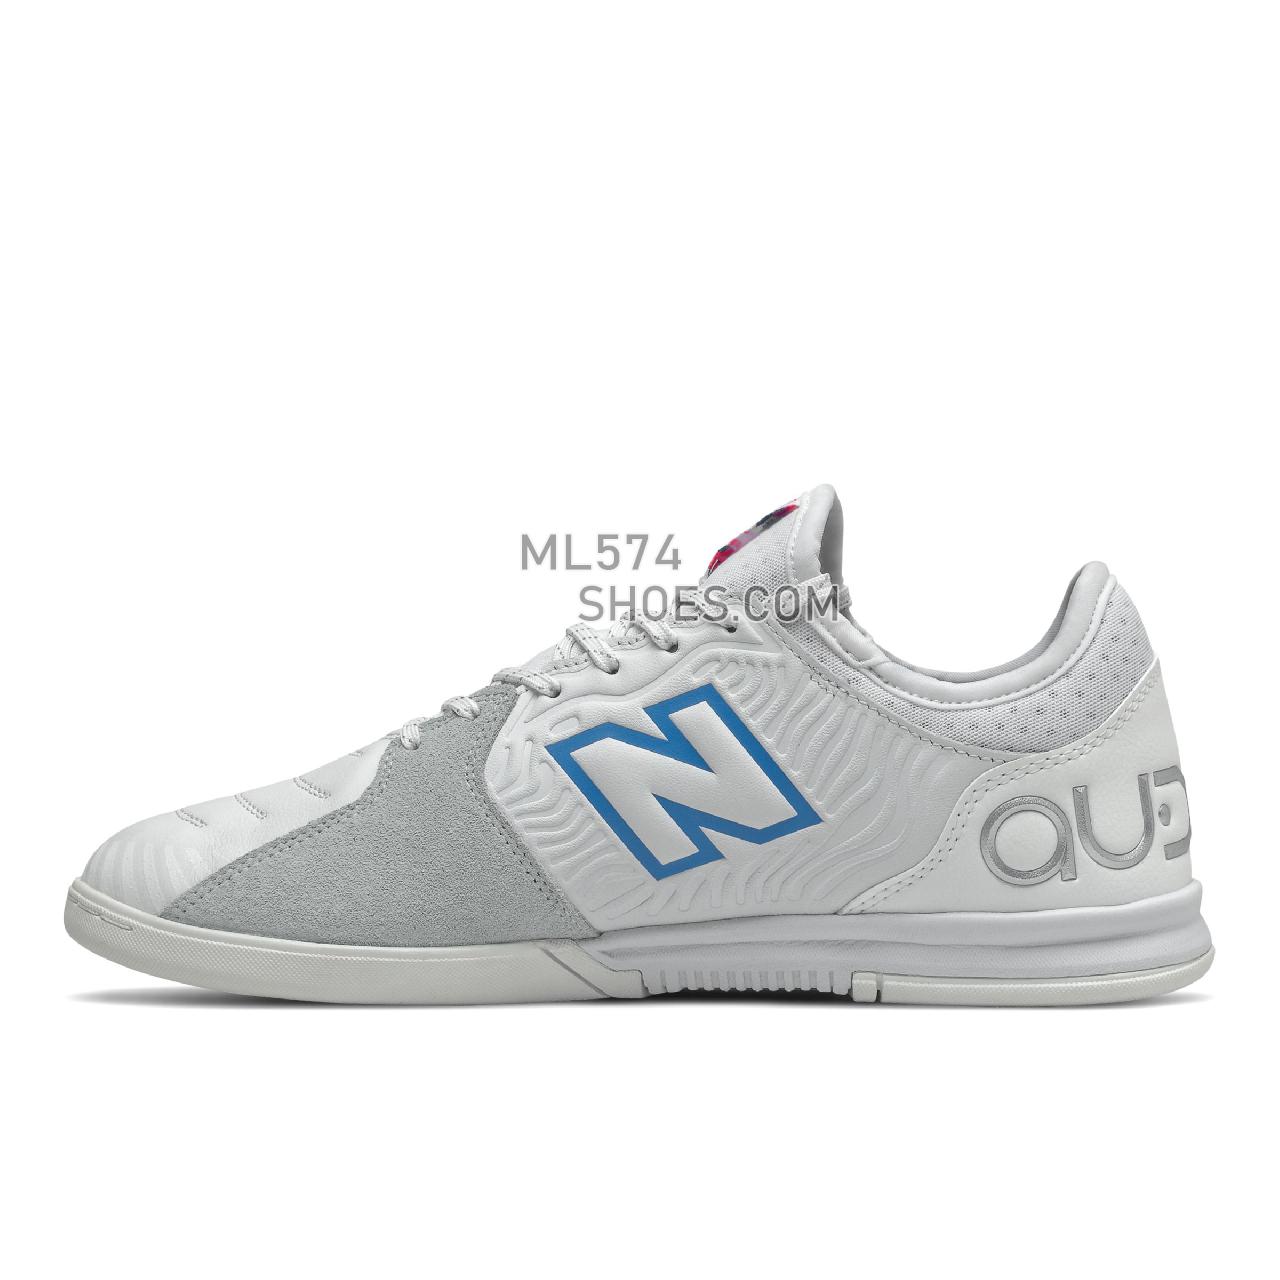 New Balance audazo V5+ Pro IN - Men's Turf FootBall Boots - White with Helium and Pink Glo - MSA1IW55